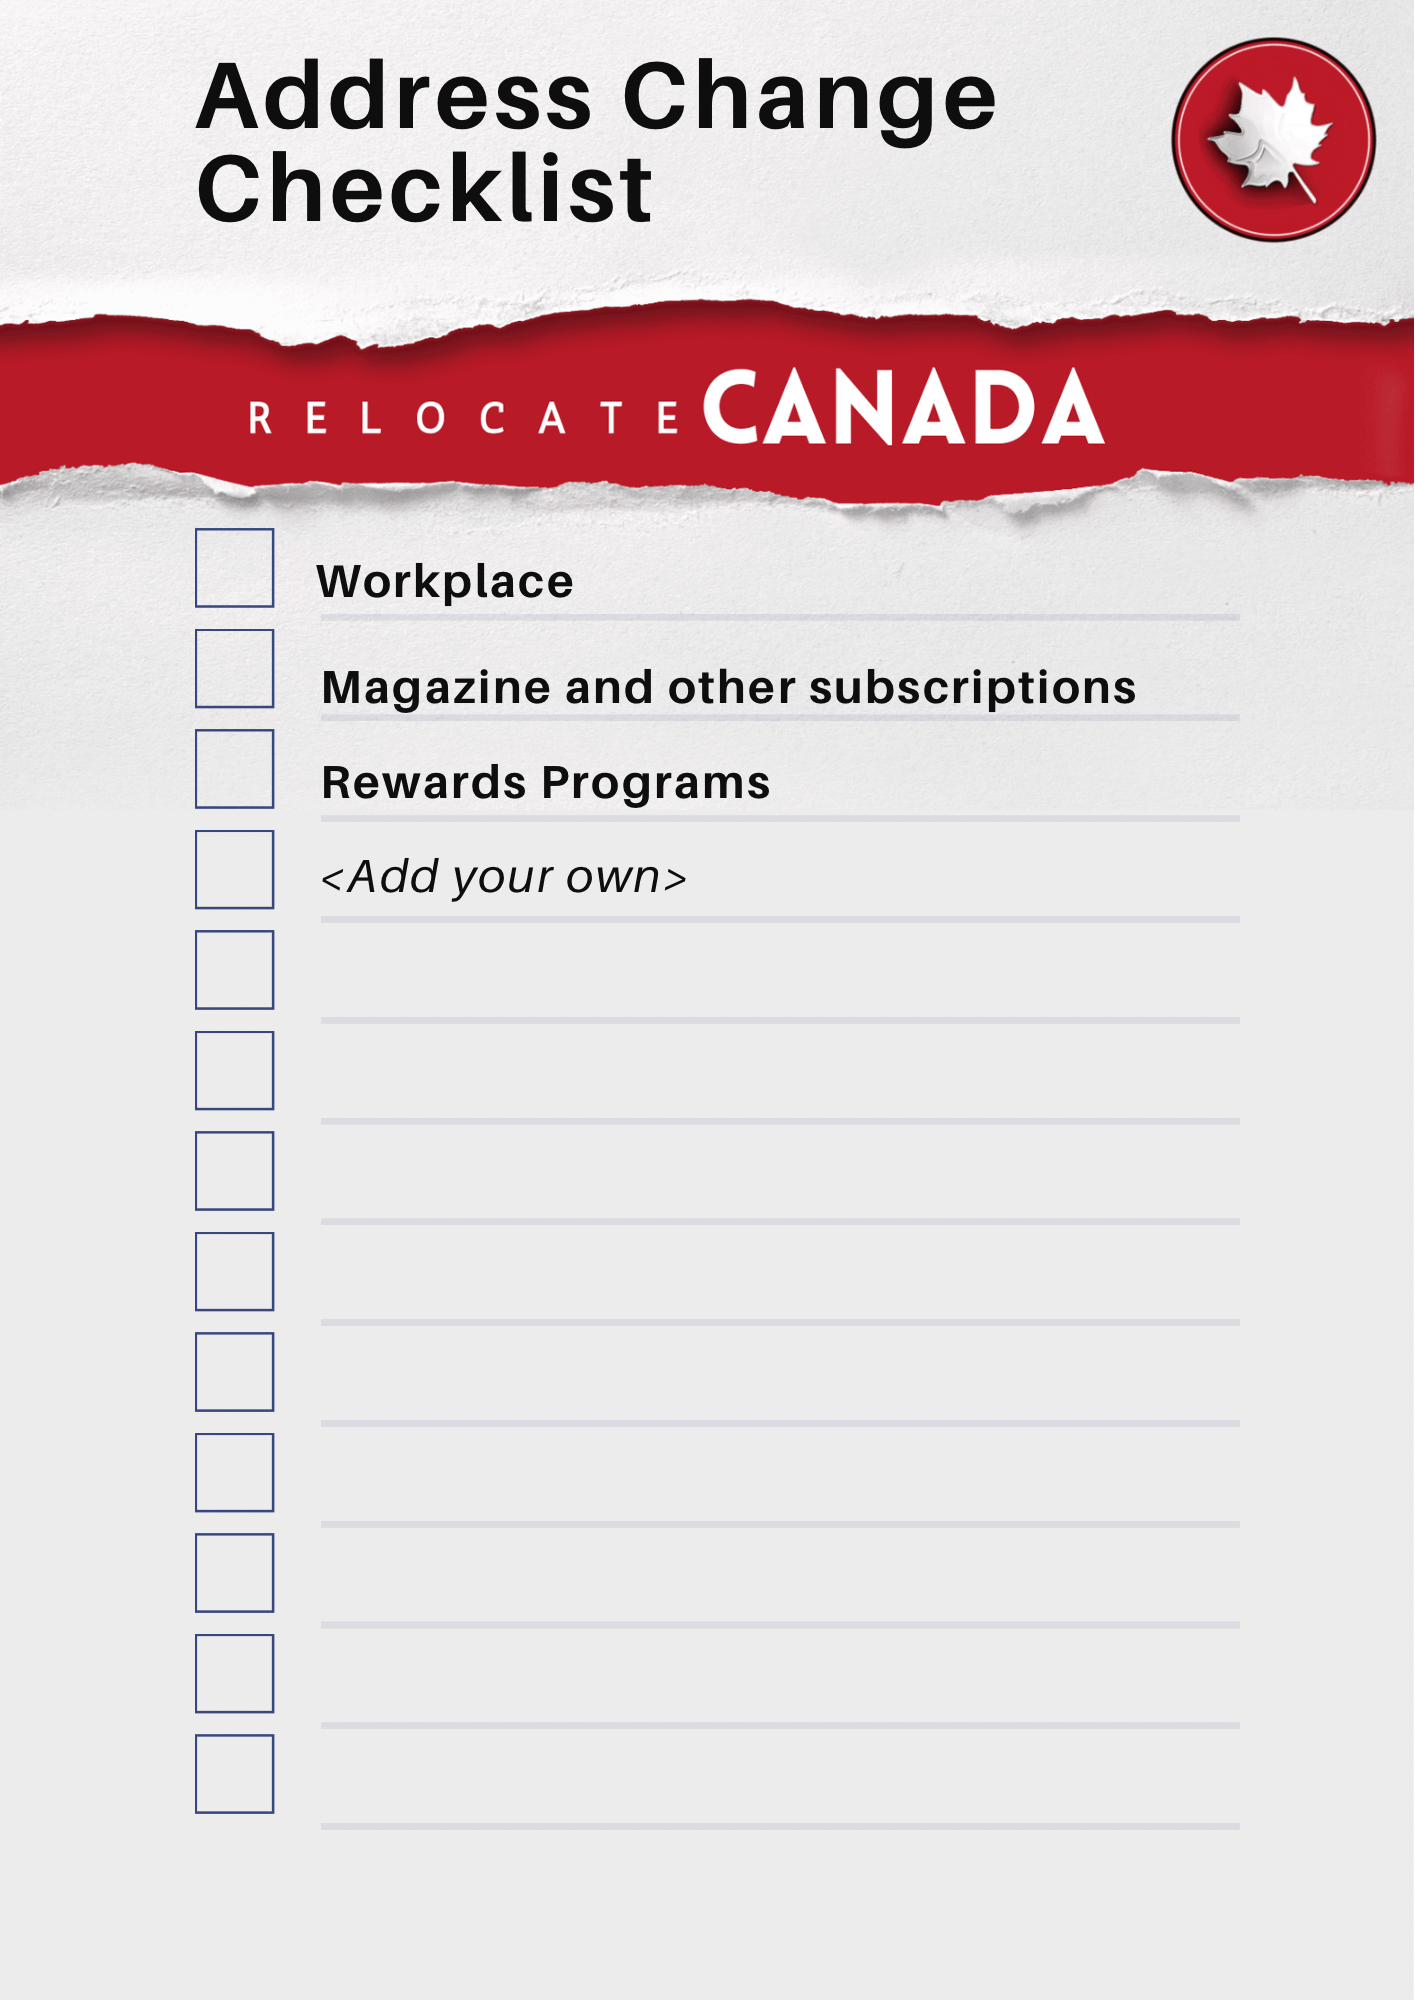 Change of Address Checklist for Canada that can be customized and personalised